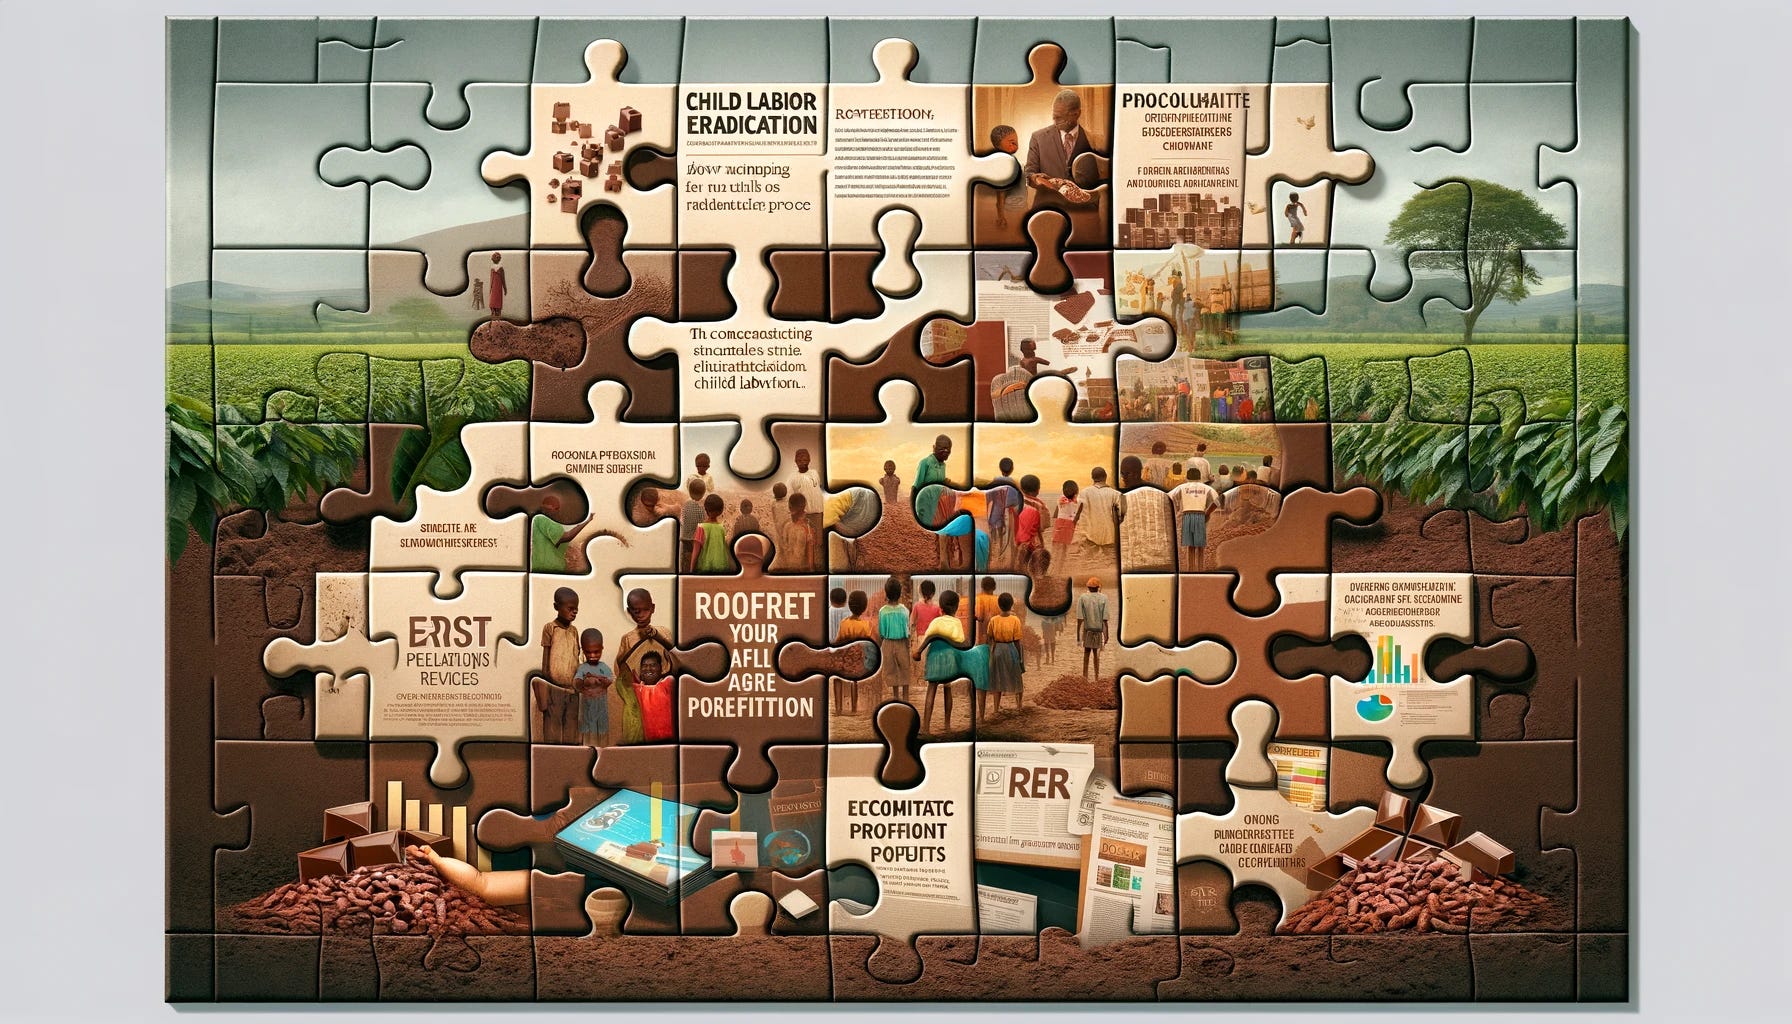 A visually compelling, text-free puzzle-themed banner illustrating the concept of child labor eradication being used as a PR strategy by chocolatiers to enhance their brand image and increase revenue, without addressing the root cause. The banner is divided into puzzle pieces: some depict scenes of children in cocoa fields, highlighting the issue of child labor. Other pieces show glossy images of high-end chocolate products and graphs indicating rising profits, symbolizing the economic benefits to companies. Additional pieces portray public relations materials, like press releases and CSR campaigns, suggesting efforts to improve public image. These puzzle pieces come together to create an image that subtly reveals how the issue of child labor is manipulated for corporate gain, without truly resolving the underlying problems. The background combines earthy tones representing agriculture with corporate greys, adding depth to the theme.